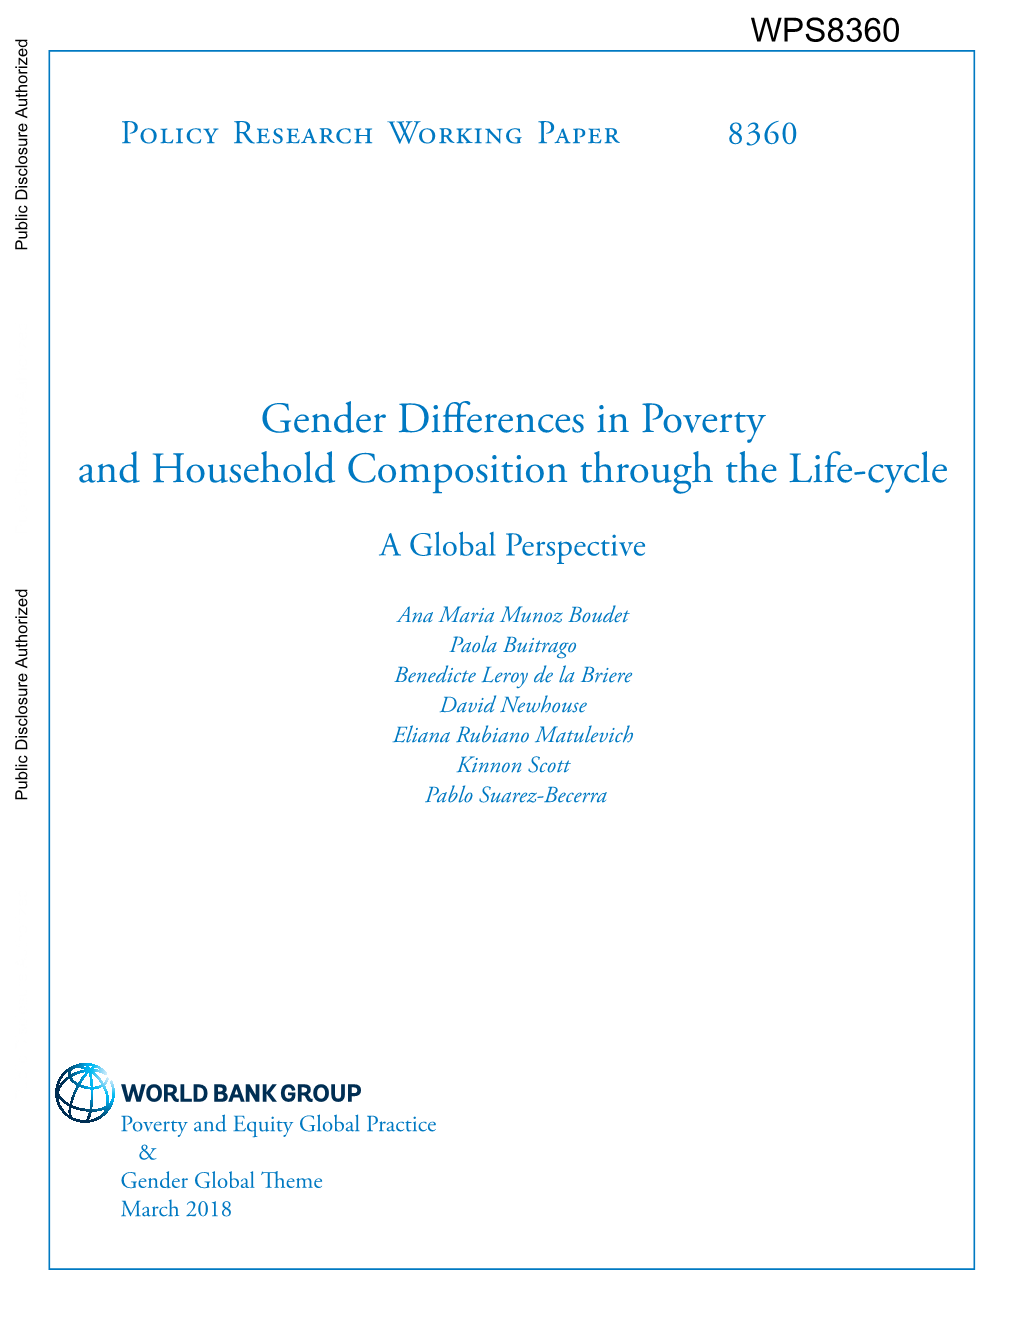 Gender Differences in Poverty and Household Composition Through the Life-Cycle